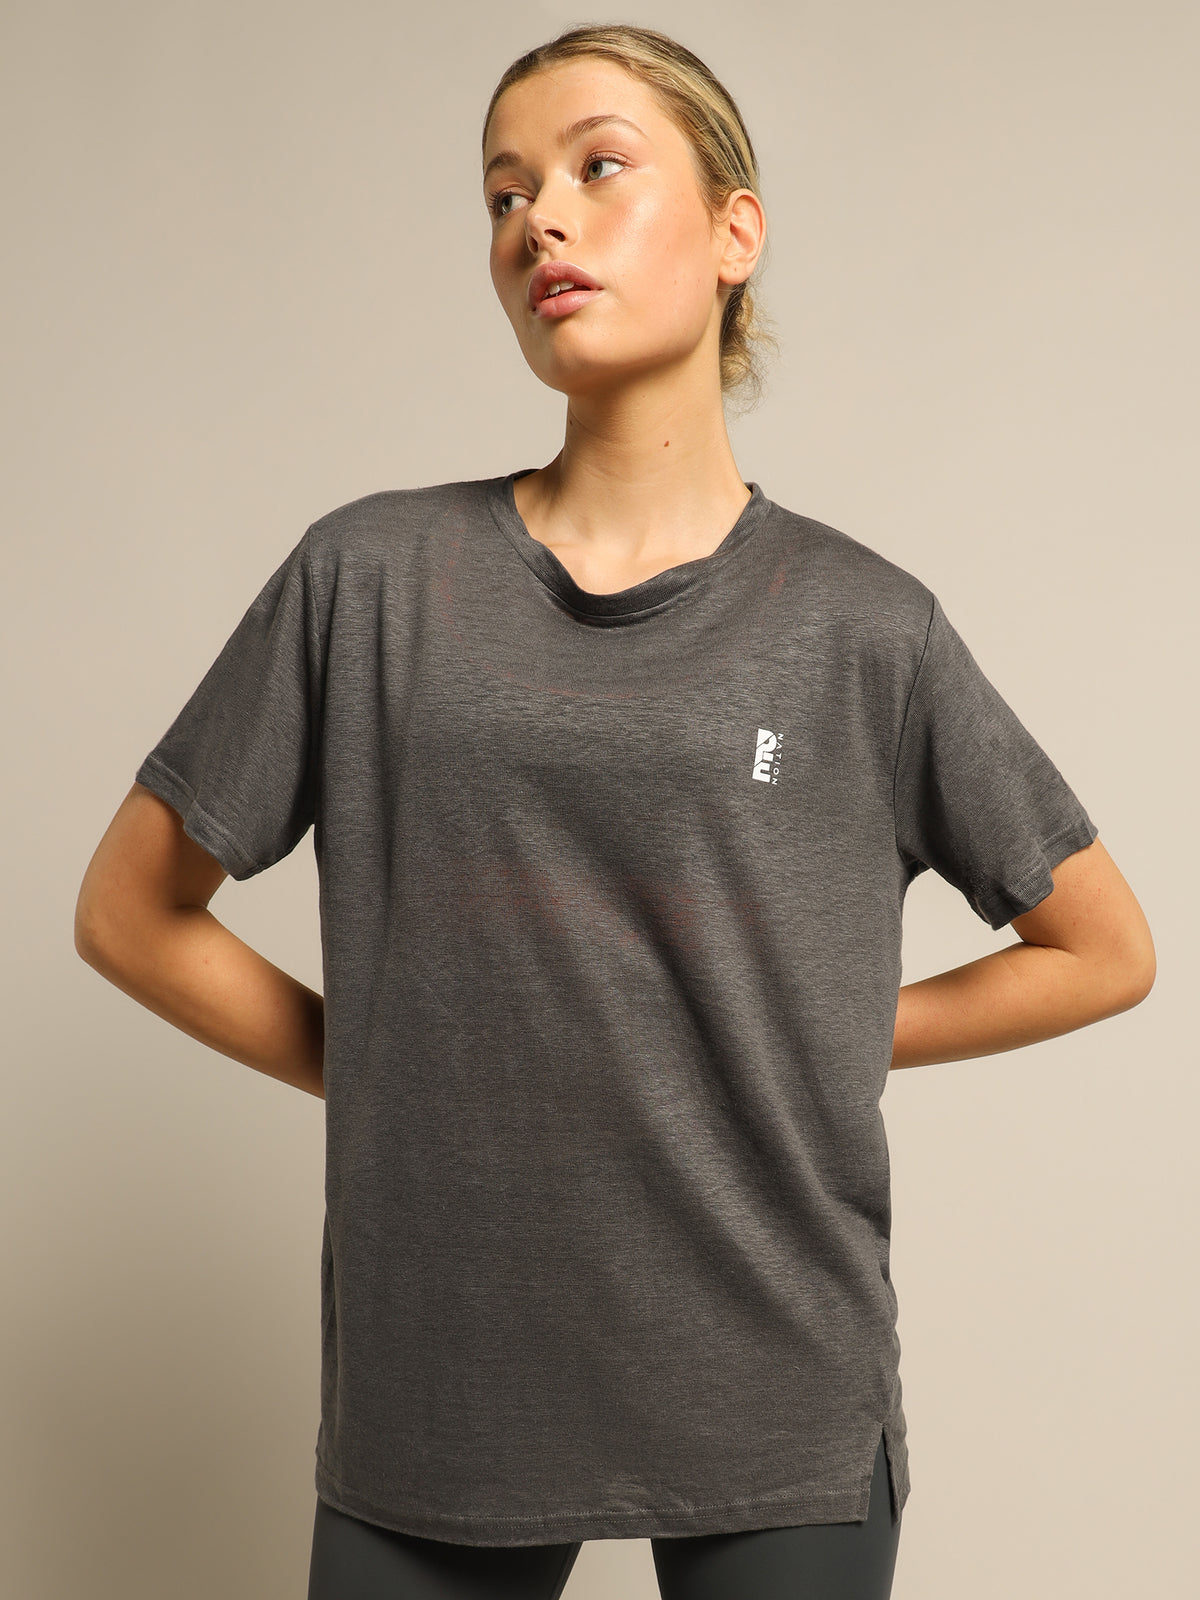 Base Jump T-Shirt in Charcoal